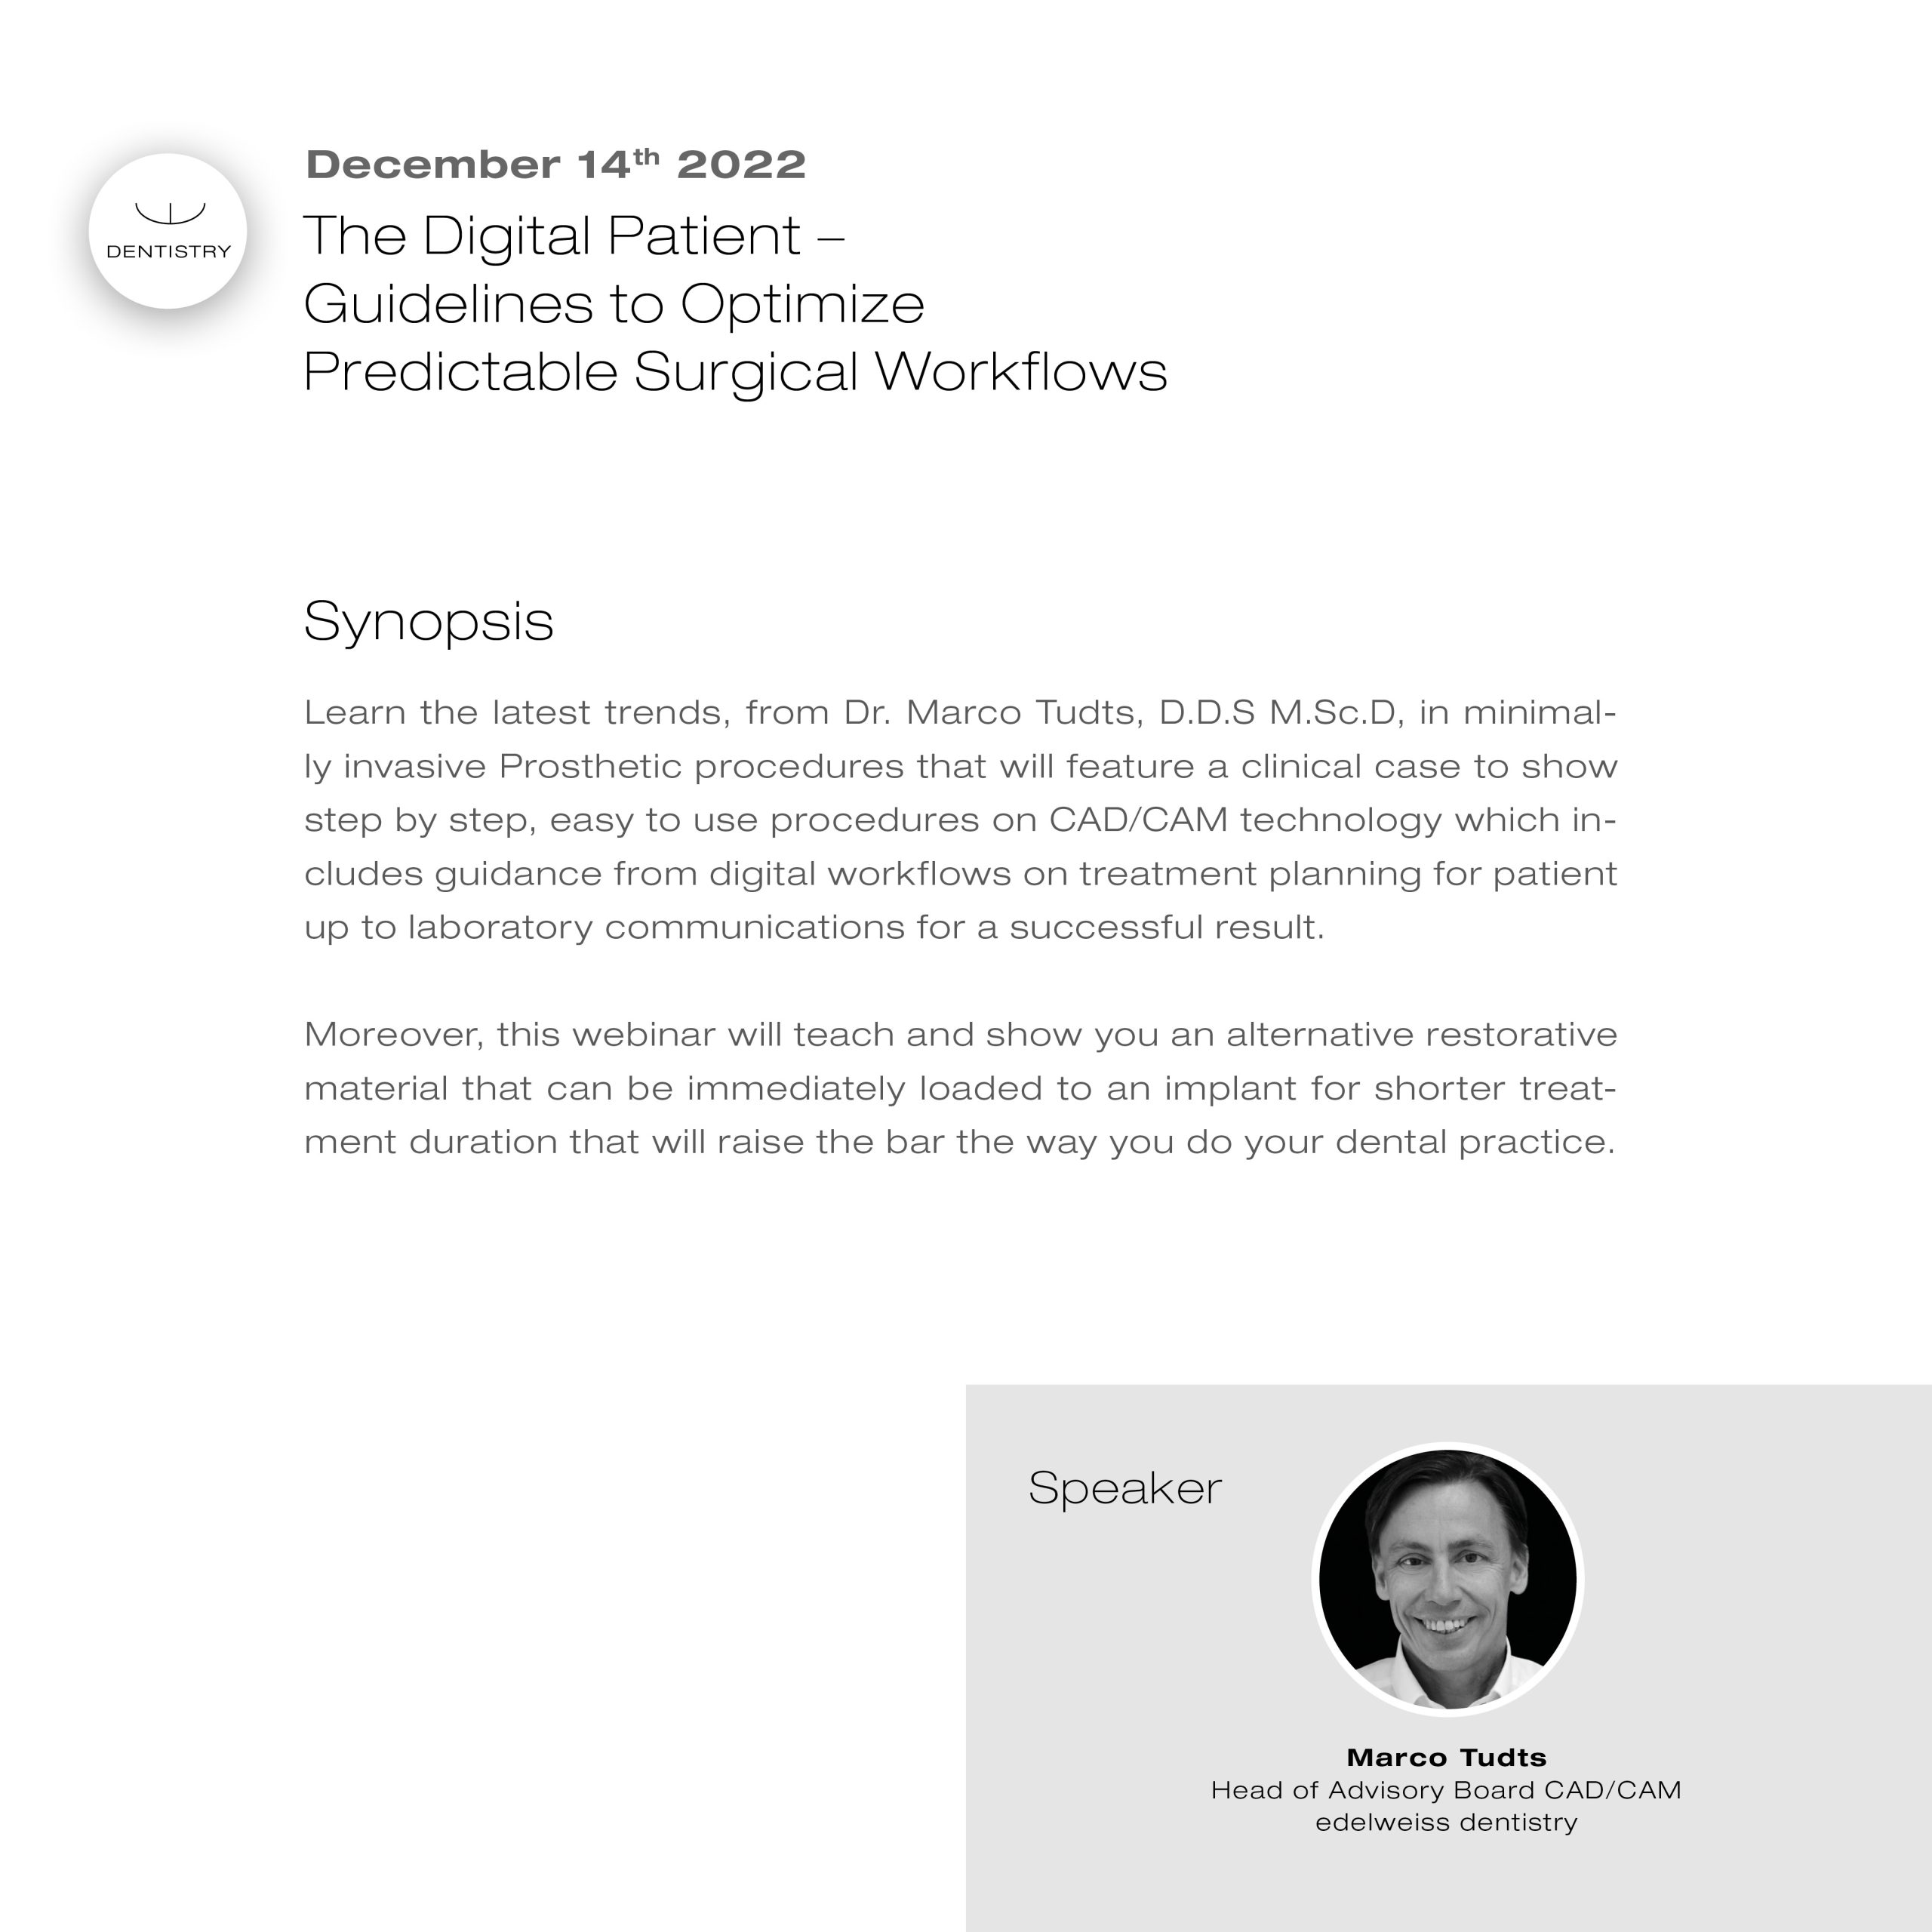 edelweiss Guidelines to Optimize Predictable Surgical Workflows webinar 14th December